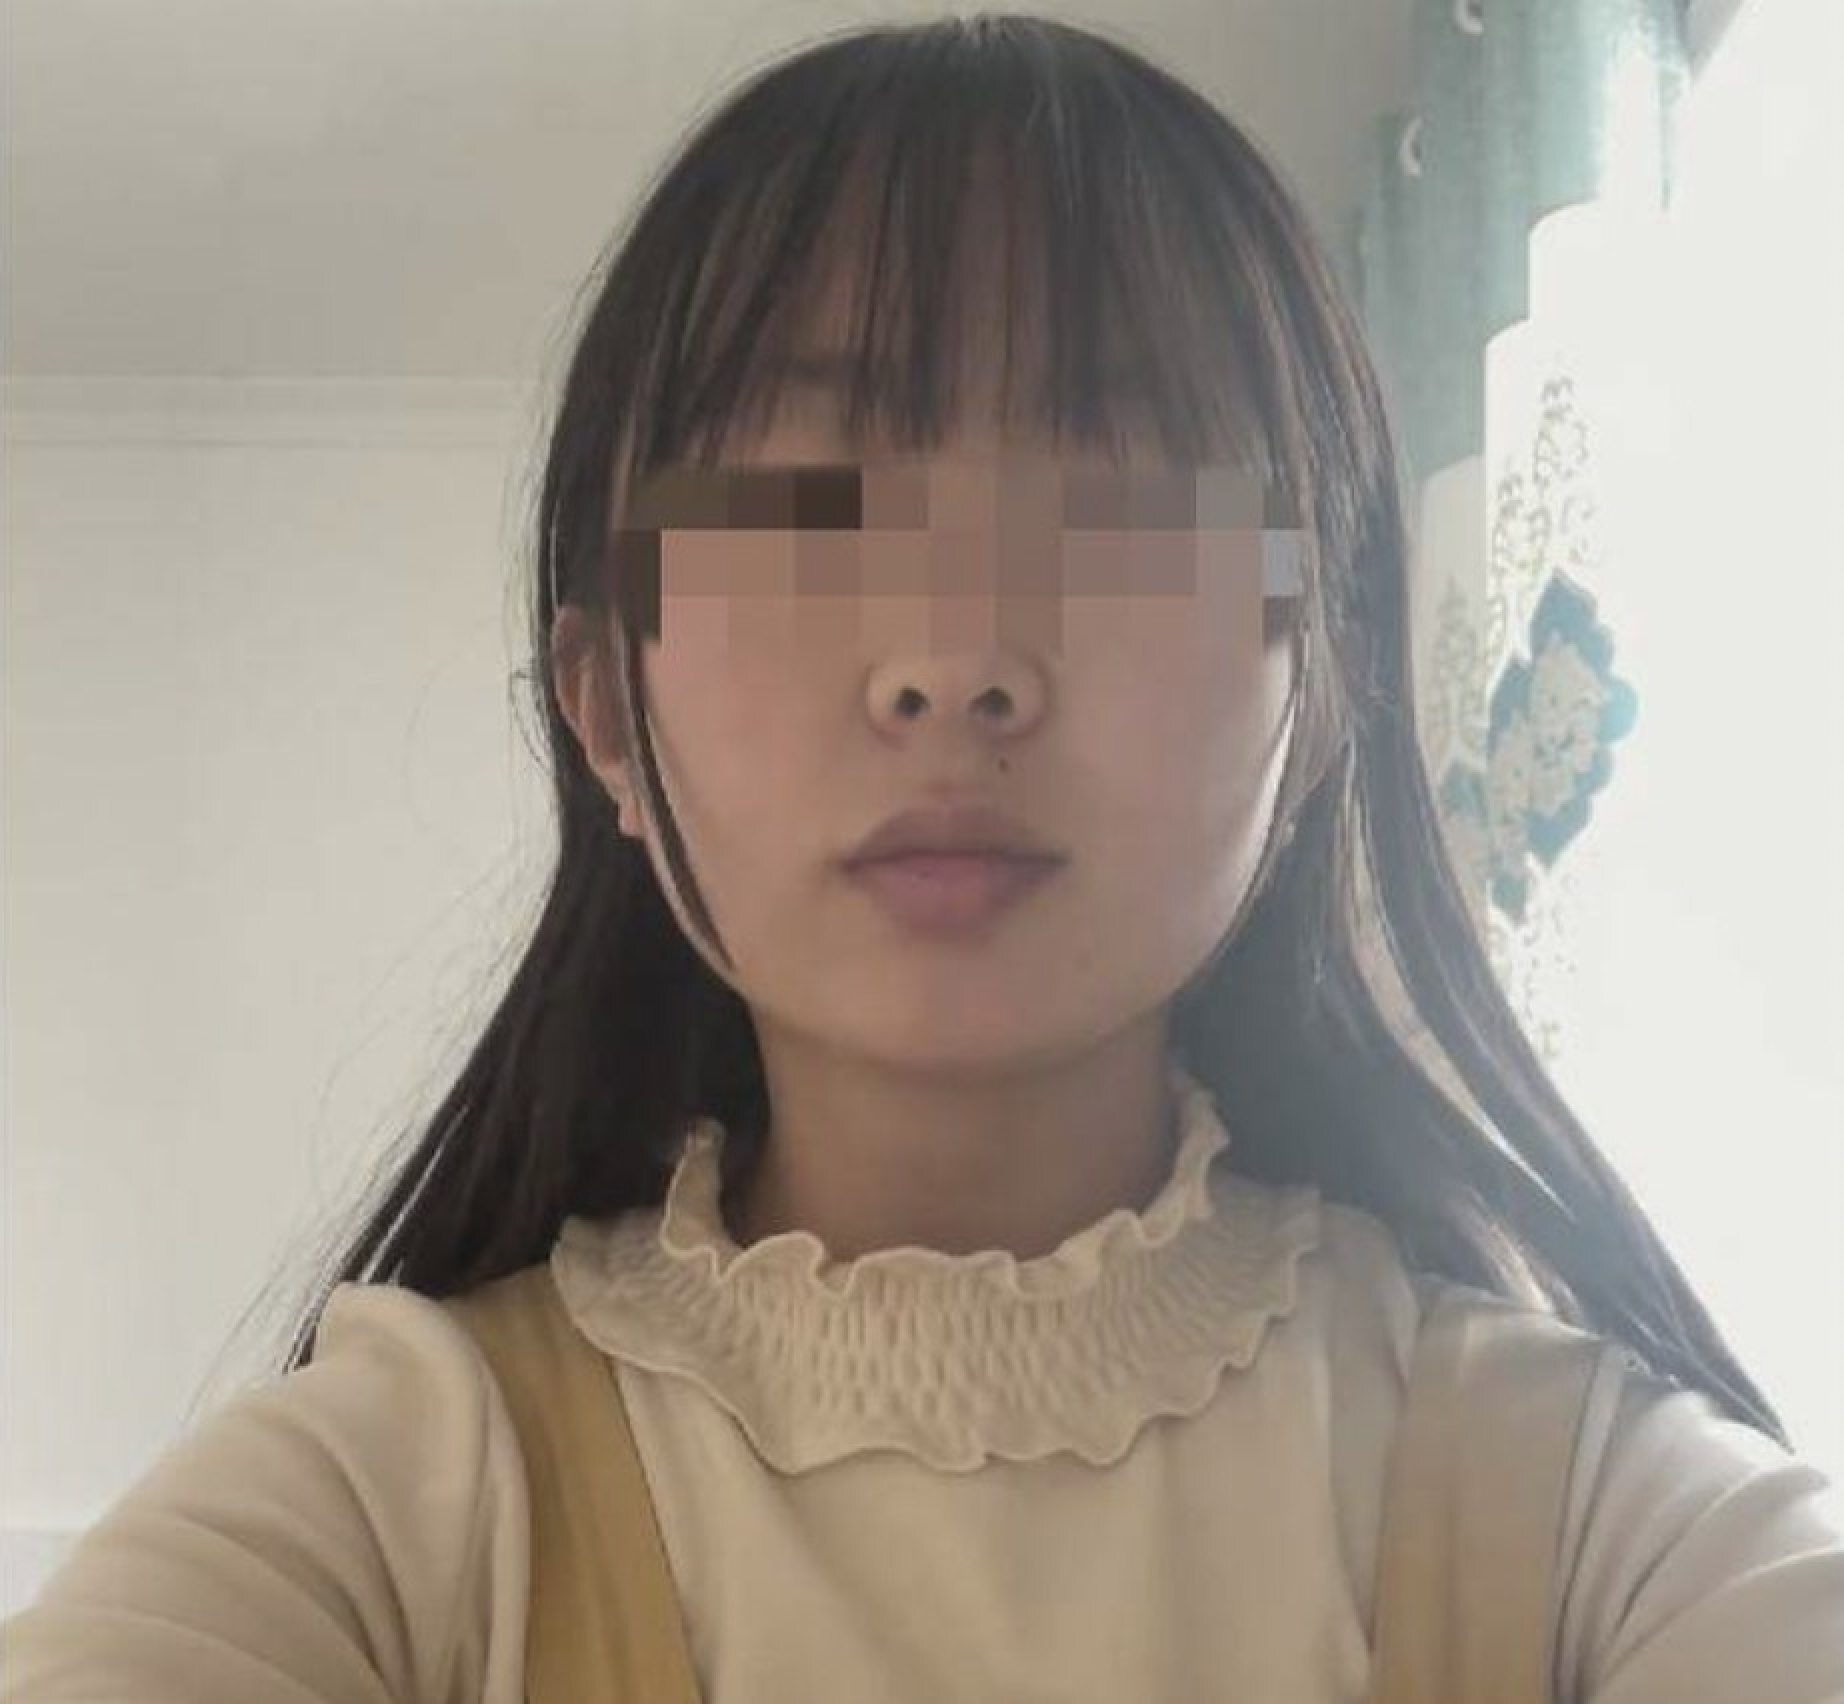 The woman, surnamed Gao, asked netizens to stop cyberbullying her family. Photo: Eastday.com